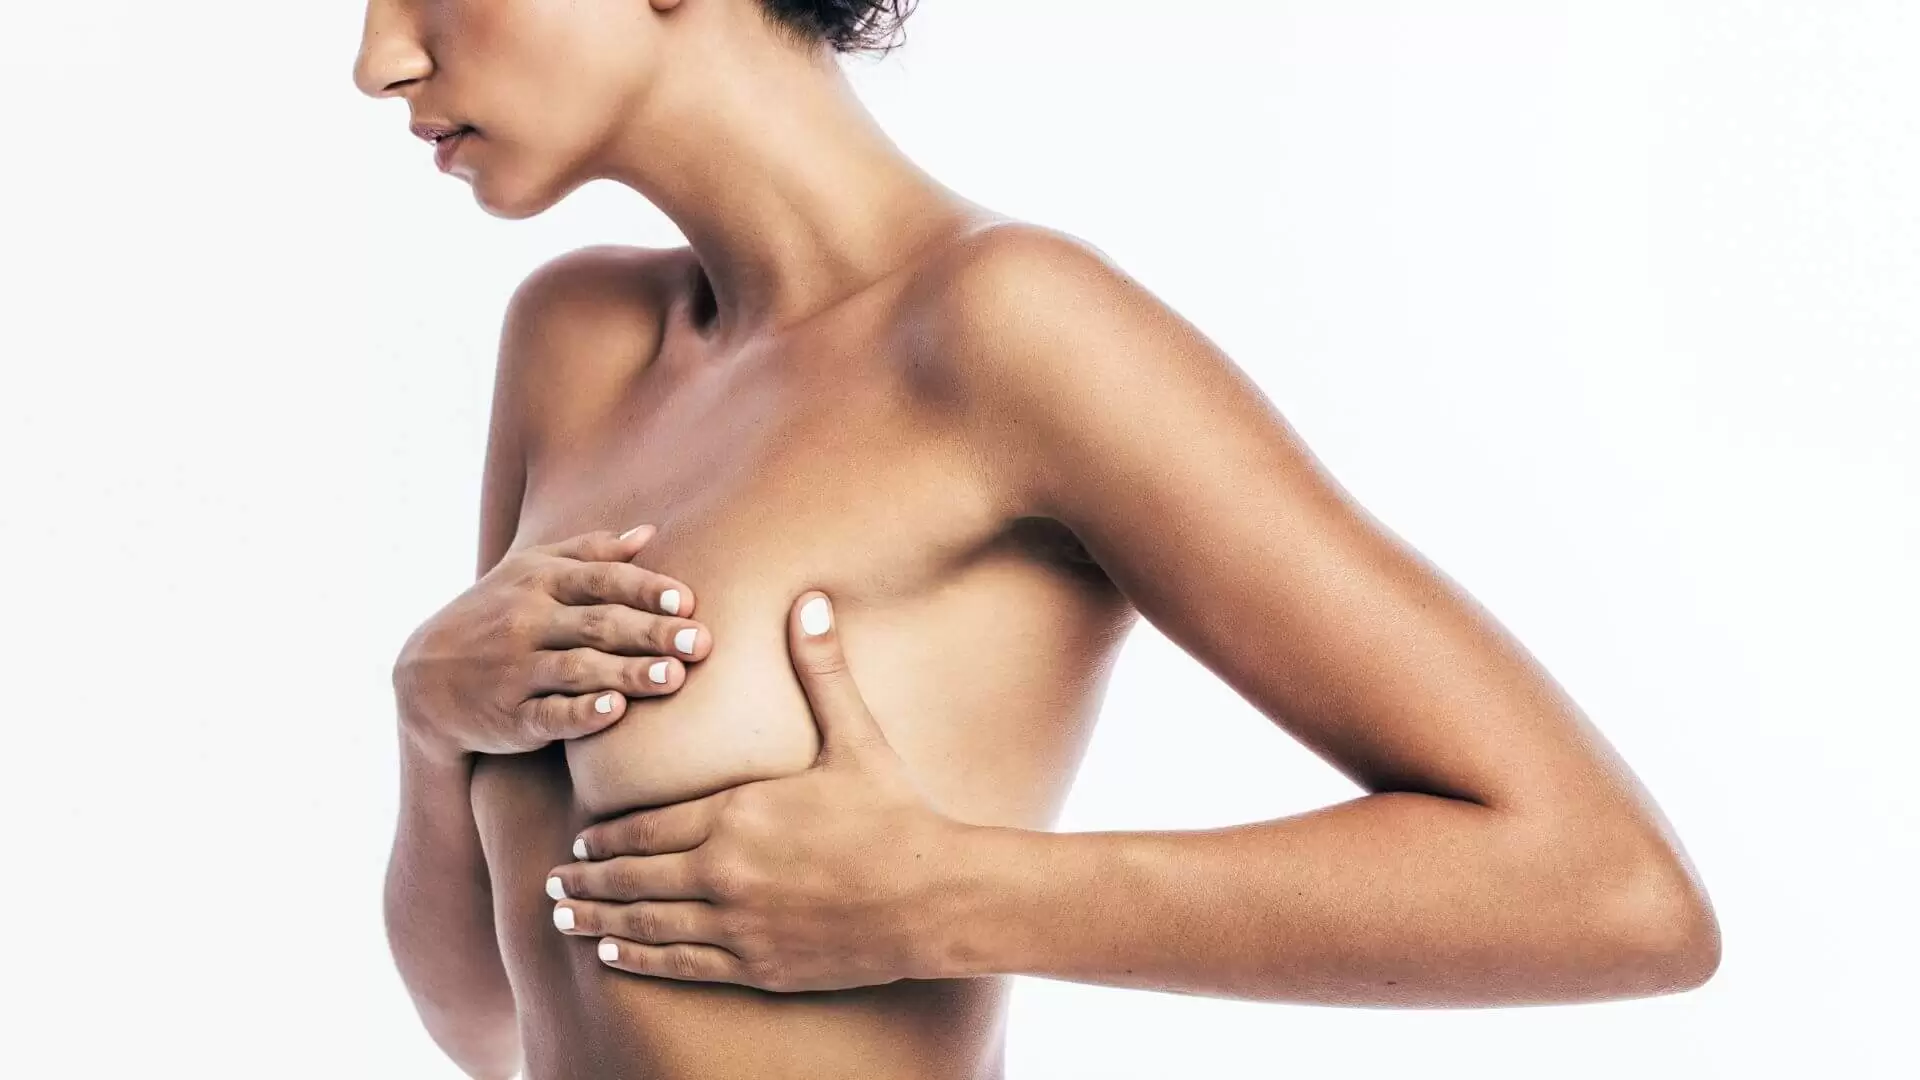 Breast Cancer In Men Features of A Rare Disease (1)